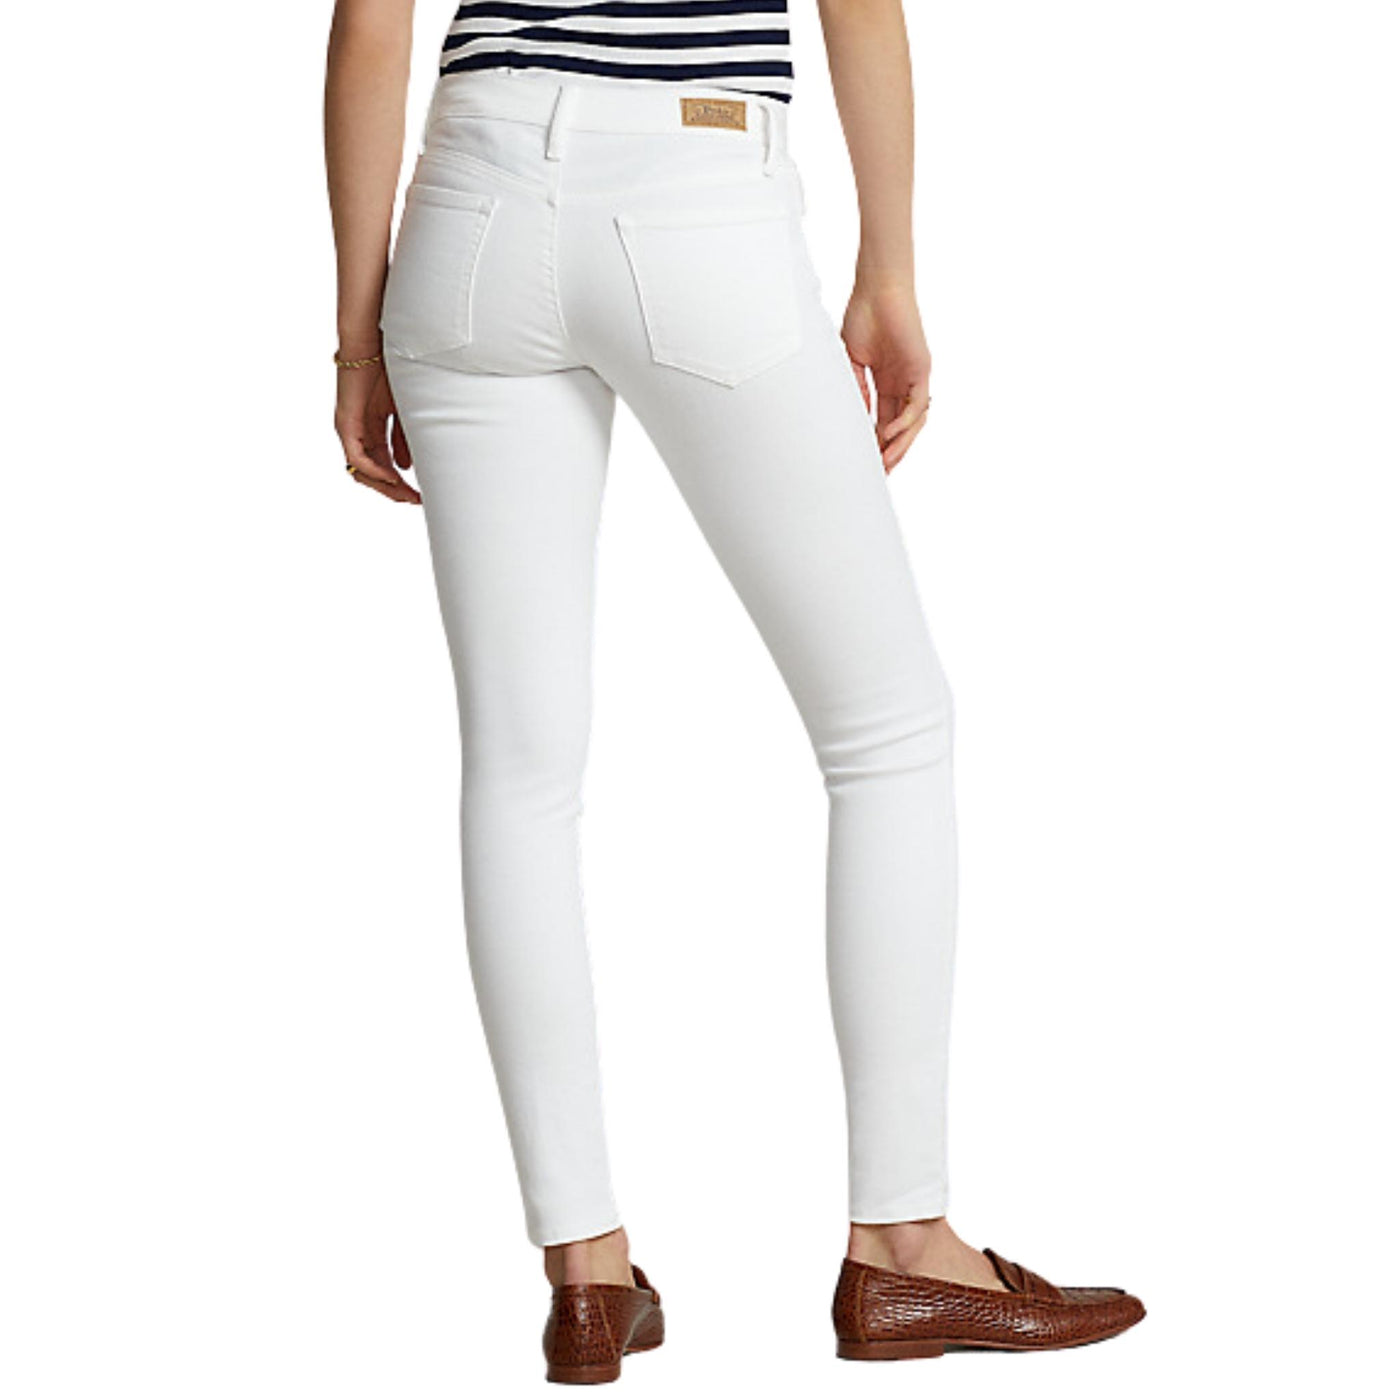 Slim fit women's trousers with Polo application